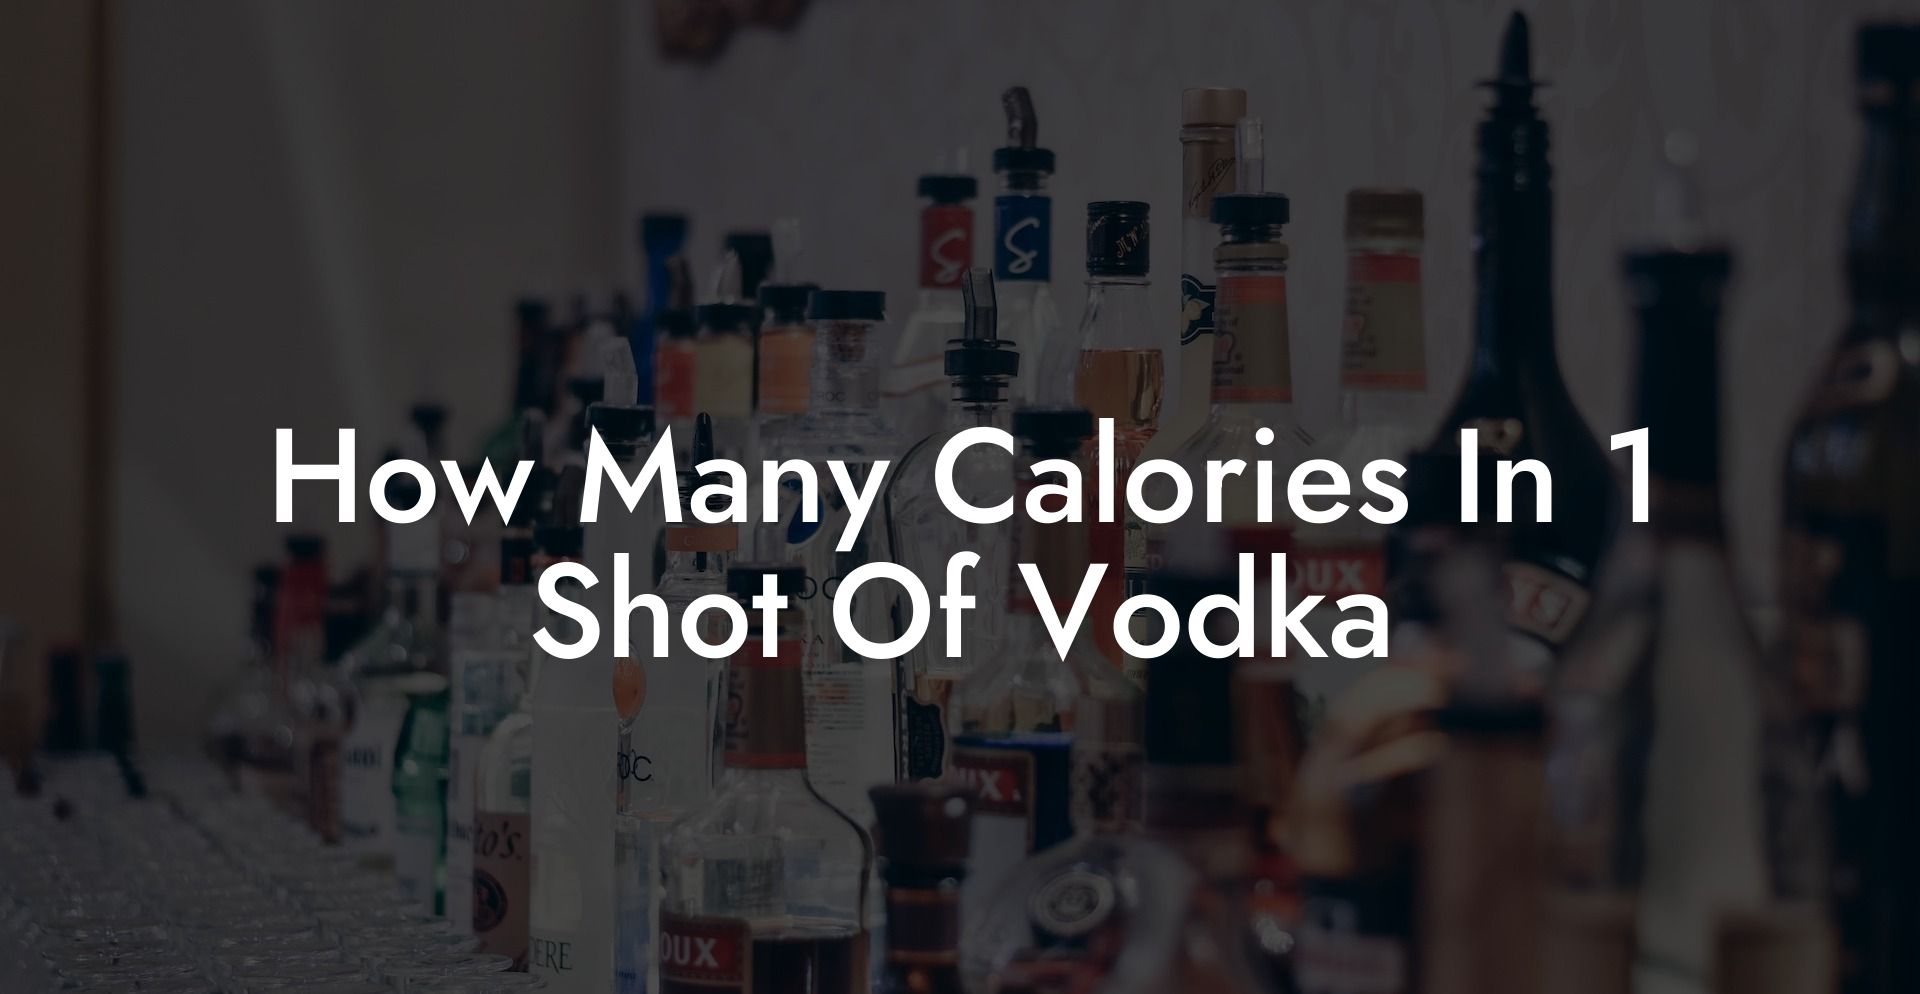 How Many Calories In 1 Shot Of Vodka